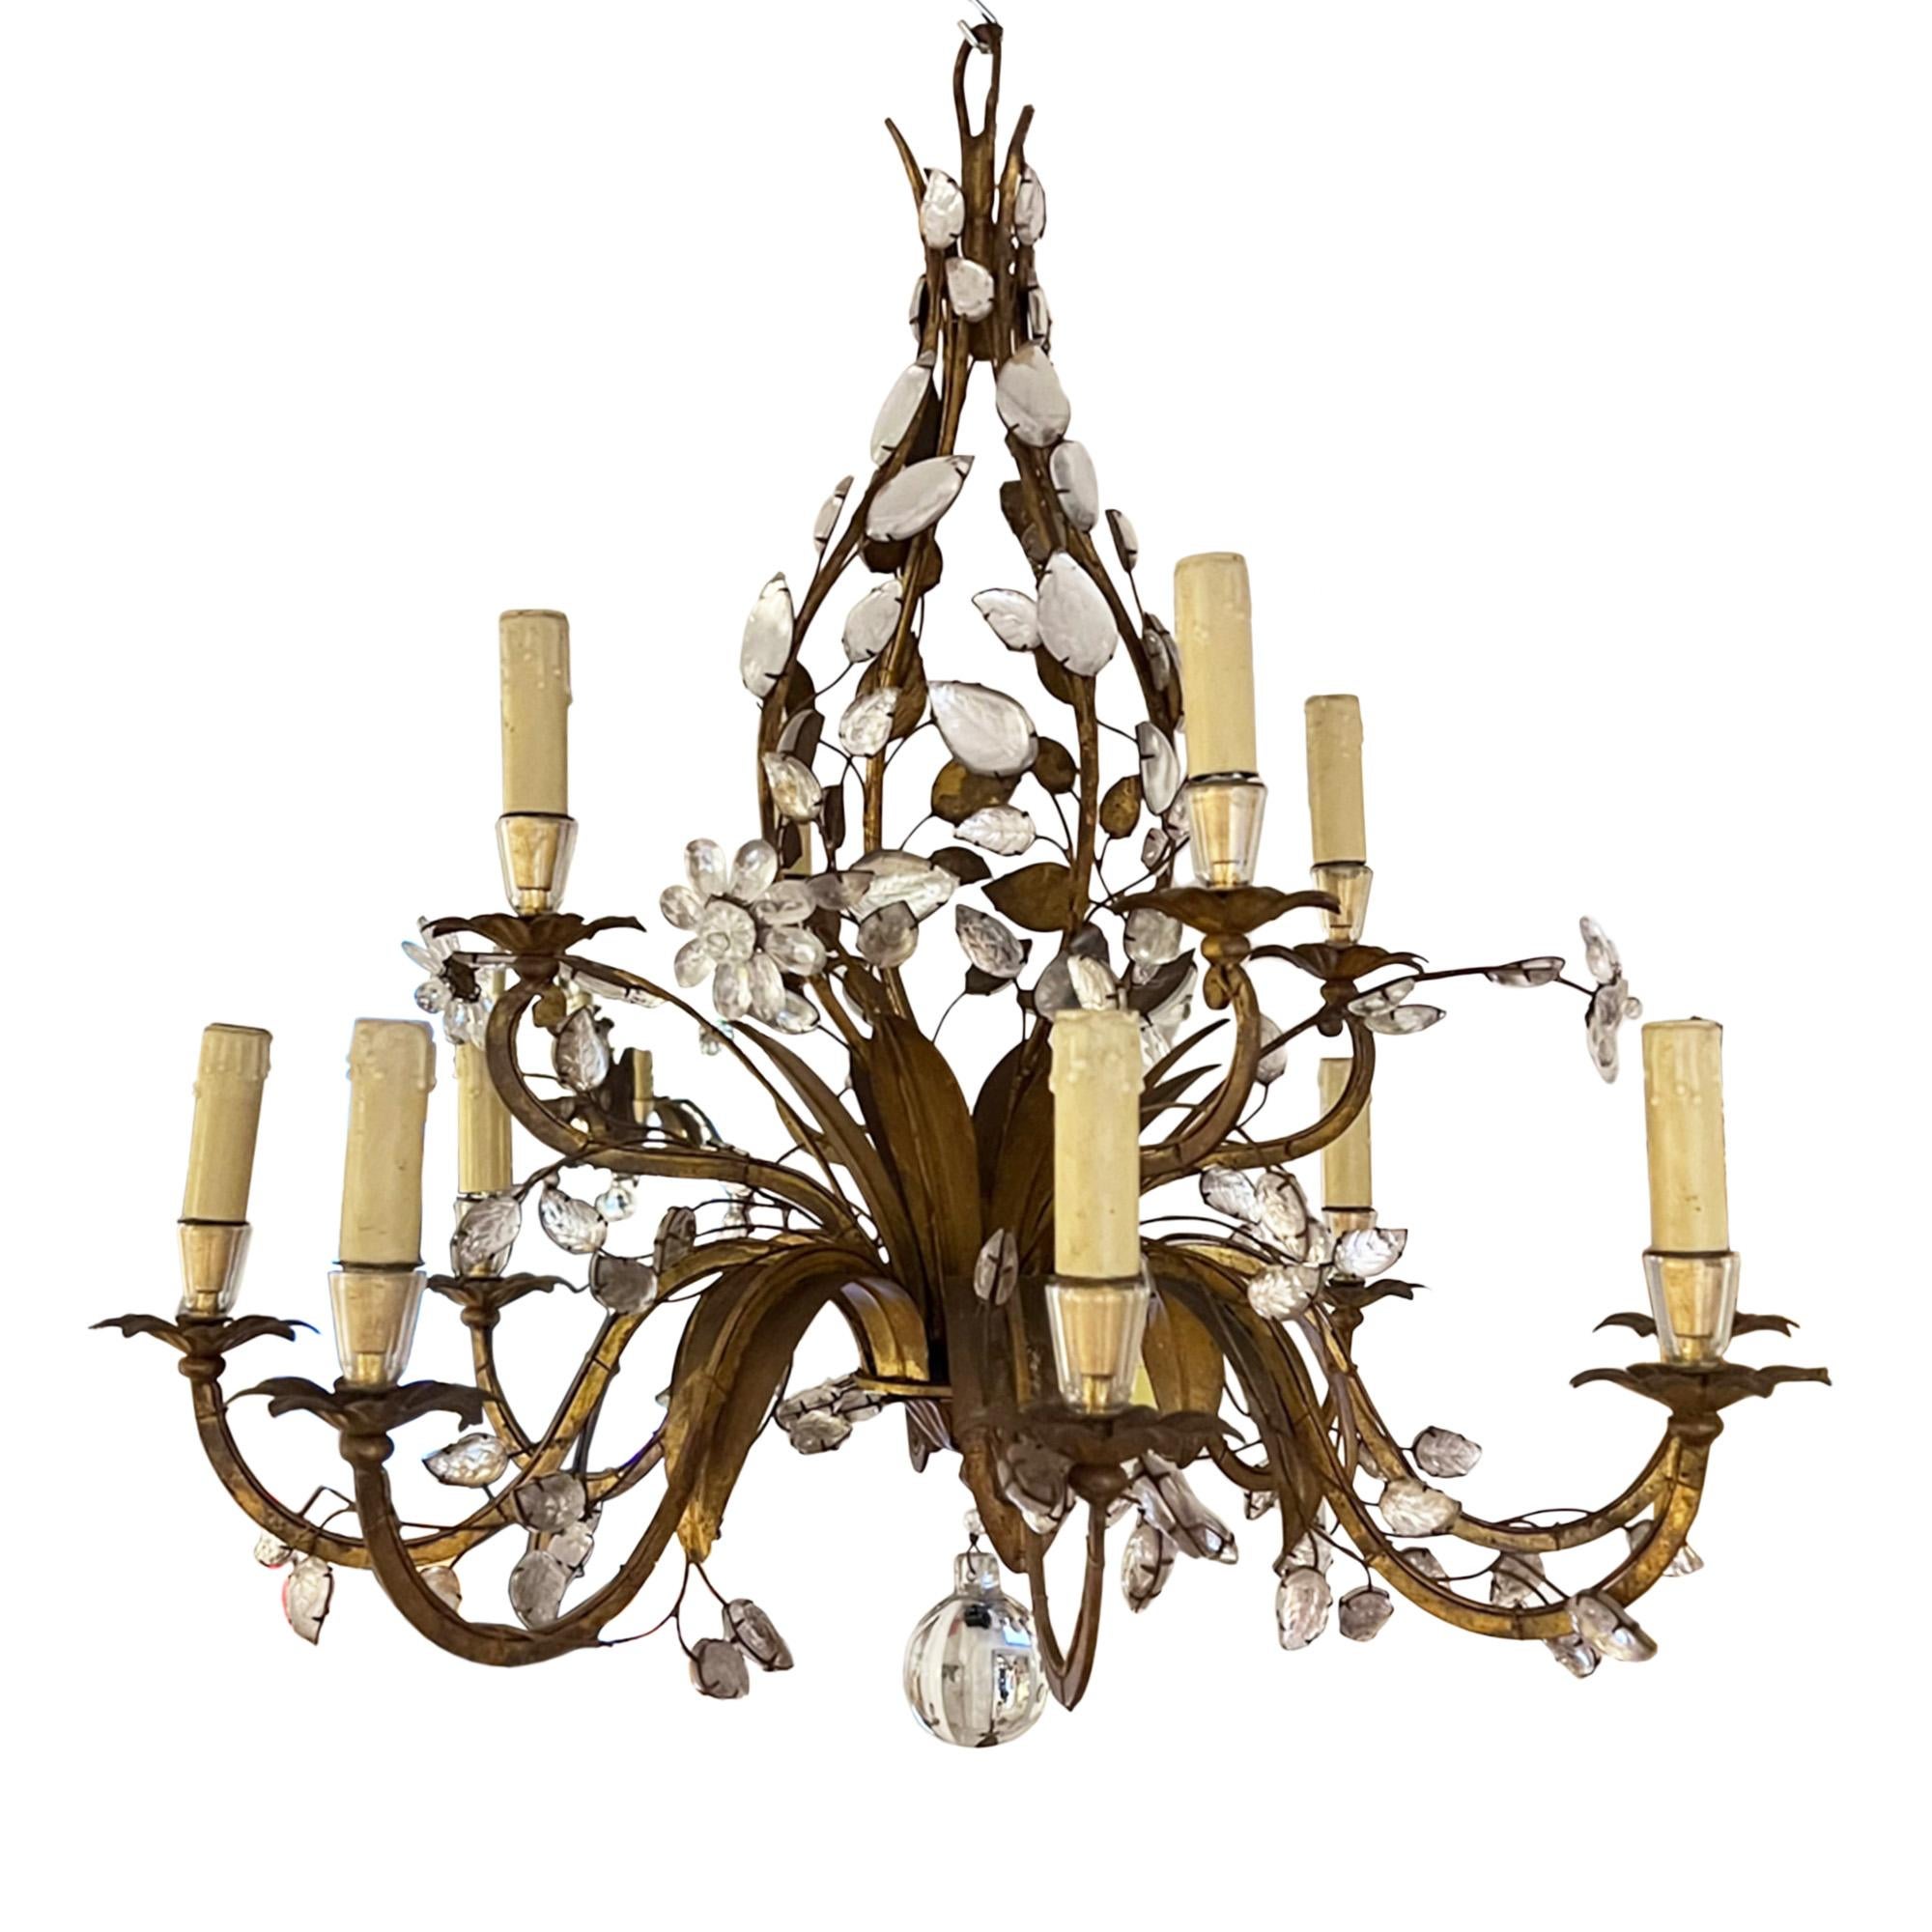 Wonderfully elegant mid 20th century gilt metal and crystal chandelier by Maison Baguès. Made in Paris in the 1960s.

This light has 8 arms, with the light fitting in the shape of an open bud. Decorated with crystal leaves and flowers - this is a